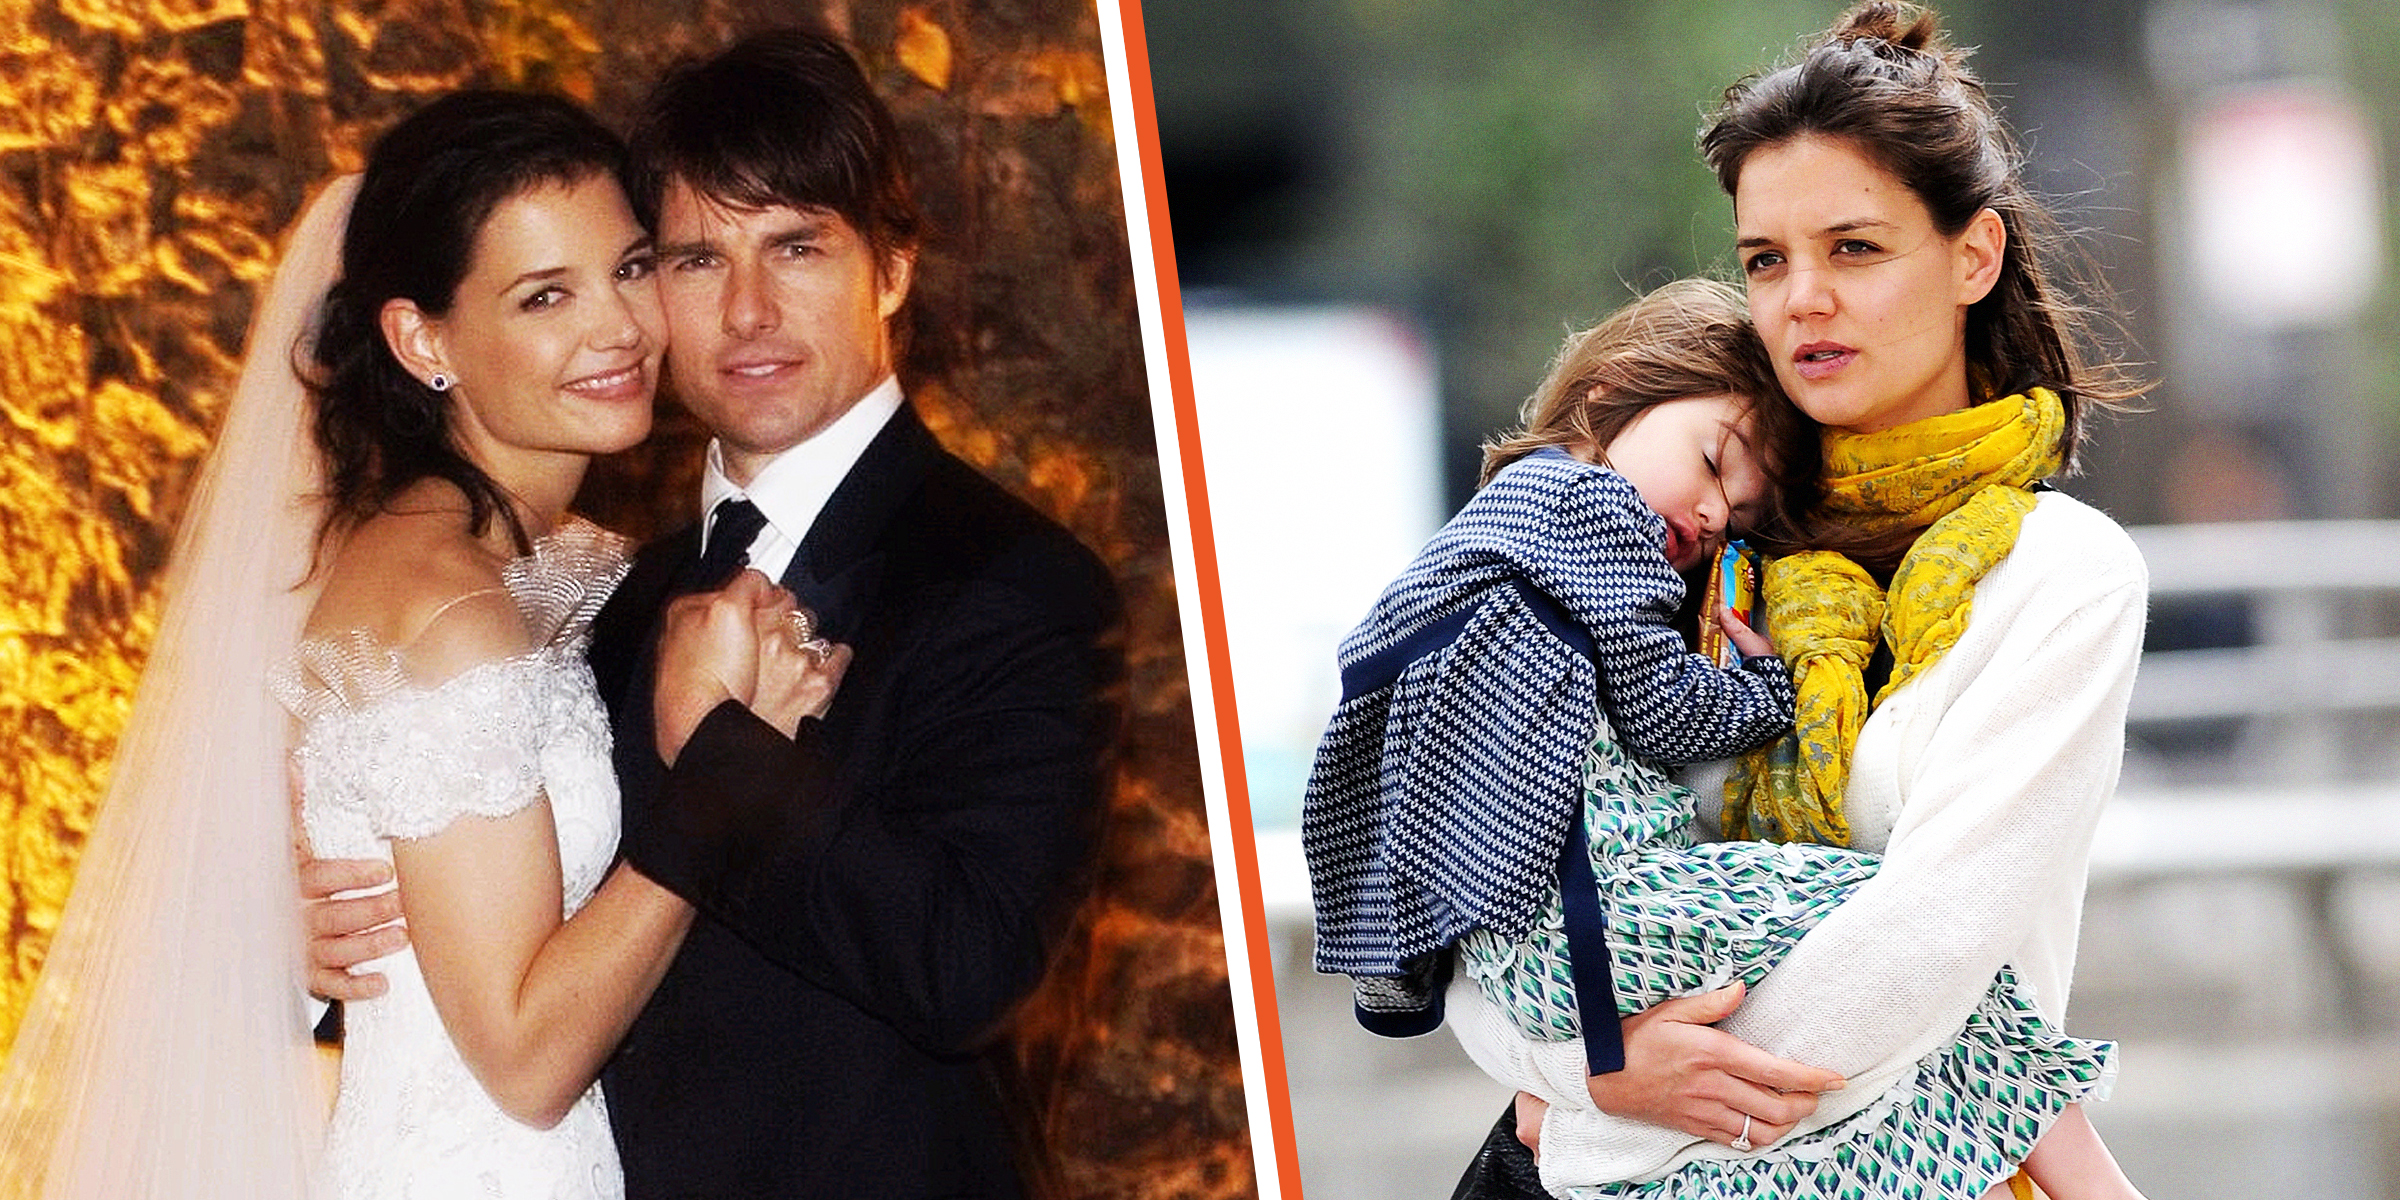 Katie Holmes and Tom Cruise | Katie Holmes and Suri Cruise | Source: Getty Images